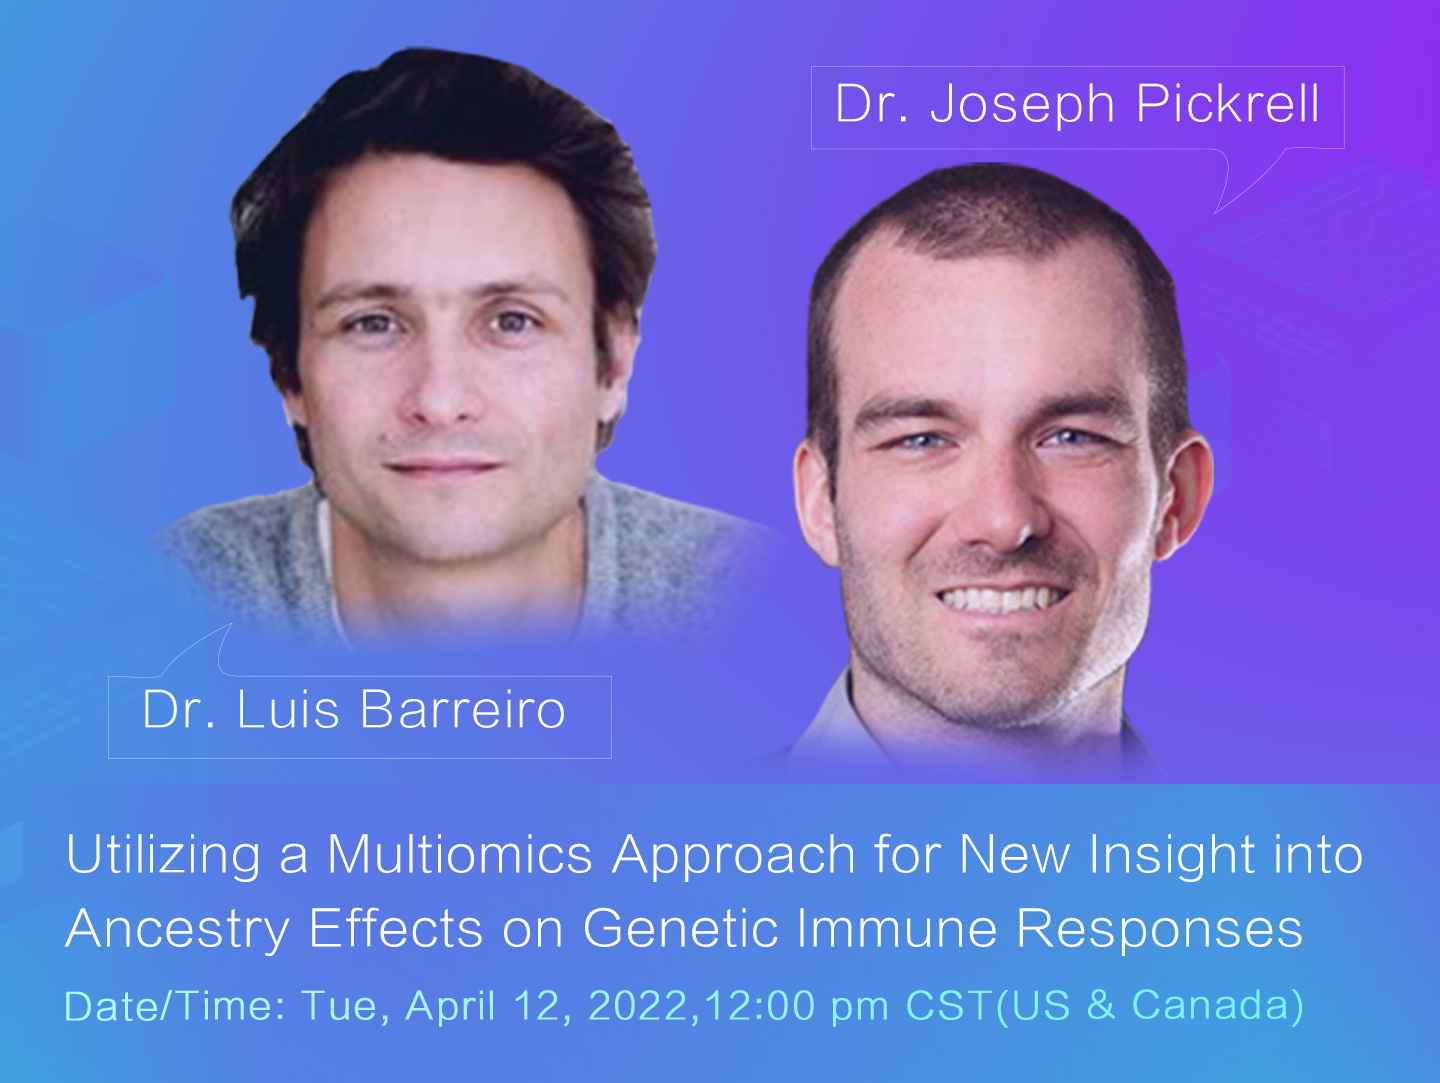 Webinar: Utilizing a Multiomics Approach for New Insight into Ancestry Effects on Genetic Immune Responses